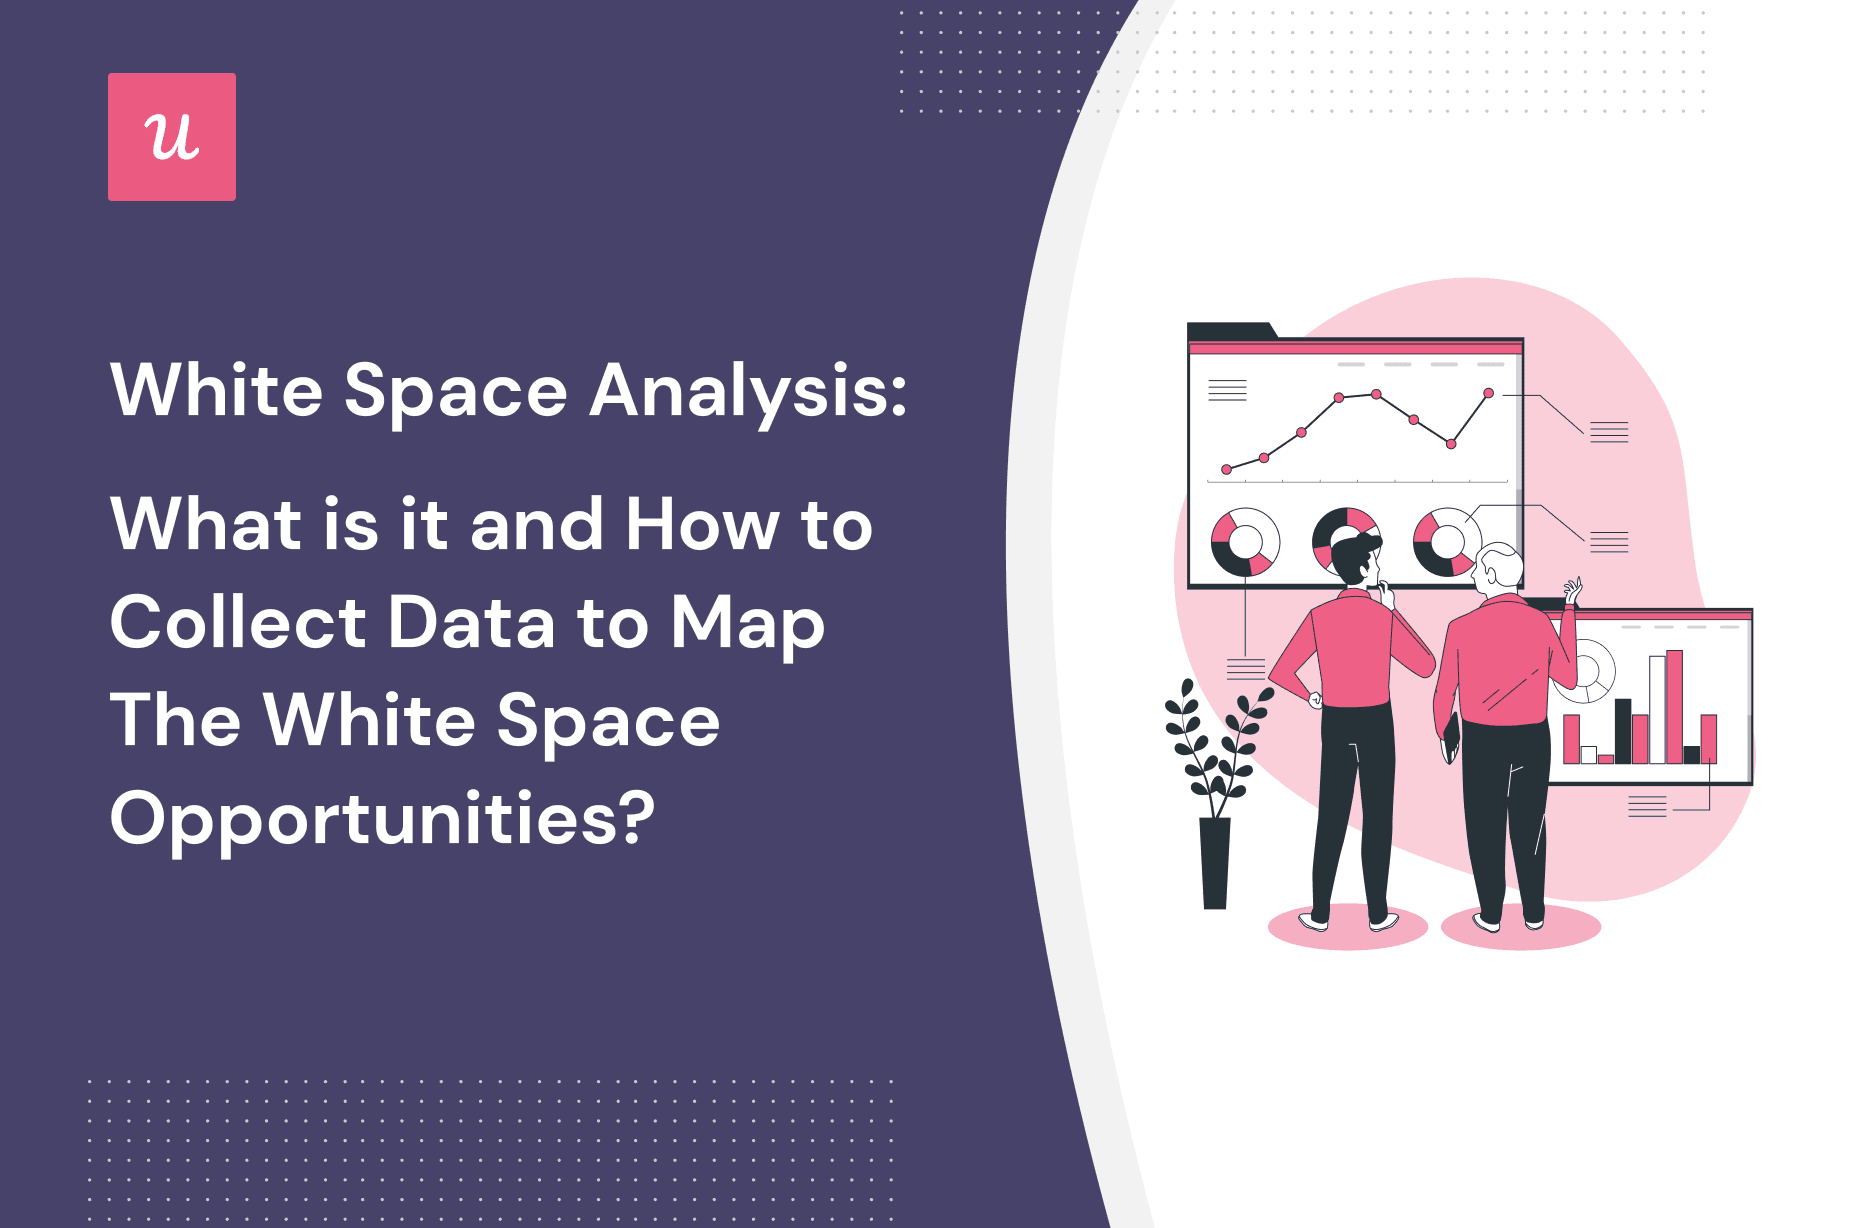 White Space Analysis: What Is It and How To Collect Data To Map the White Space Opportunities? cover